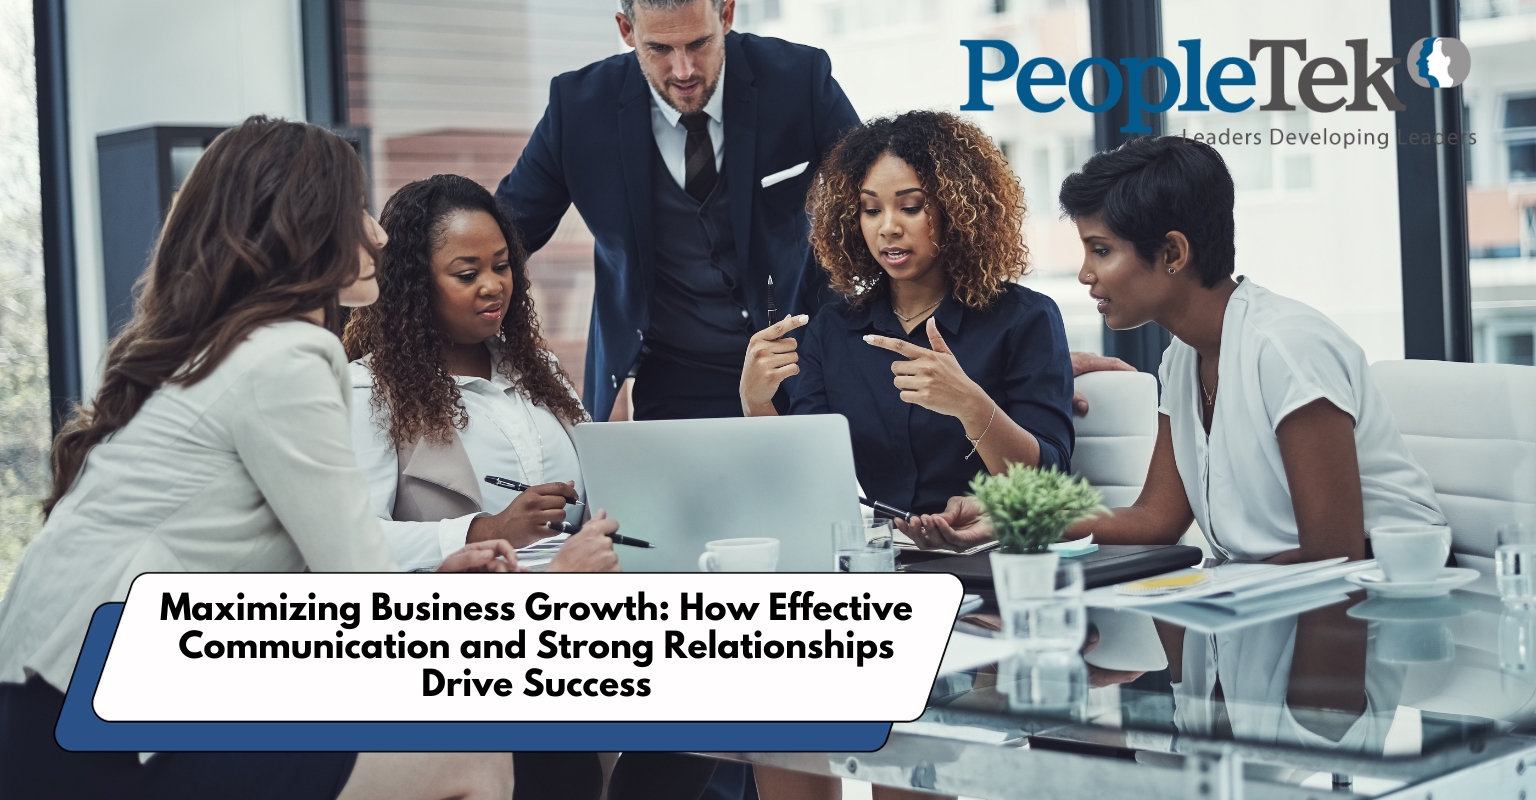 Maximizing Business Growth: How Effective Communication and Strong Relationships Drive Success